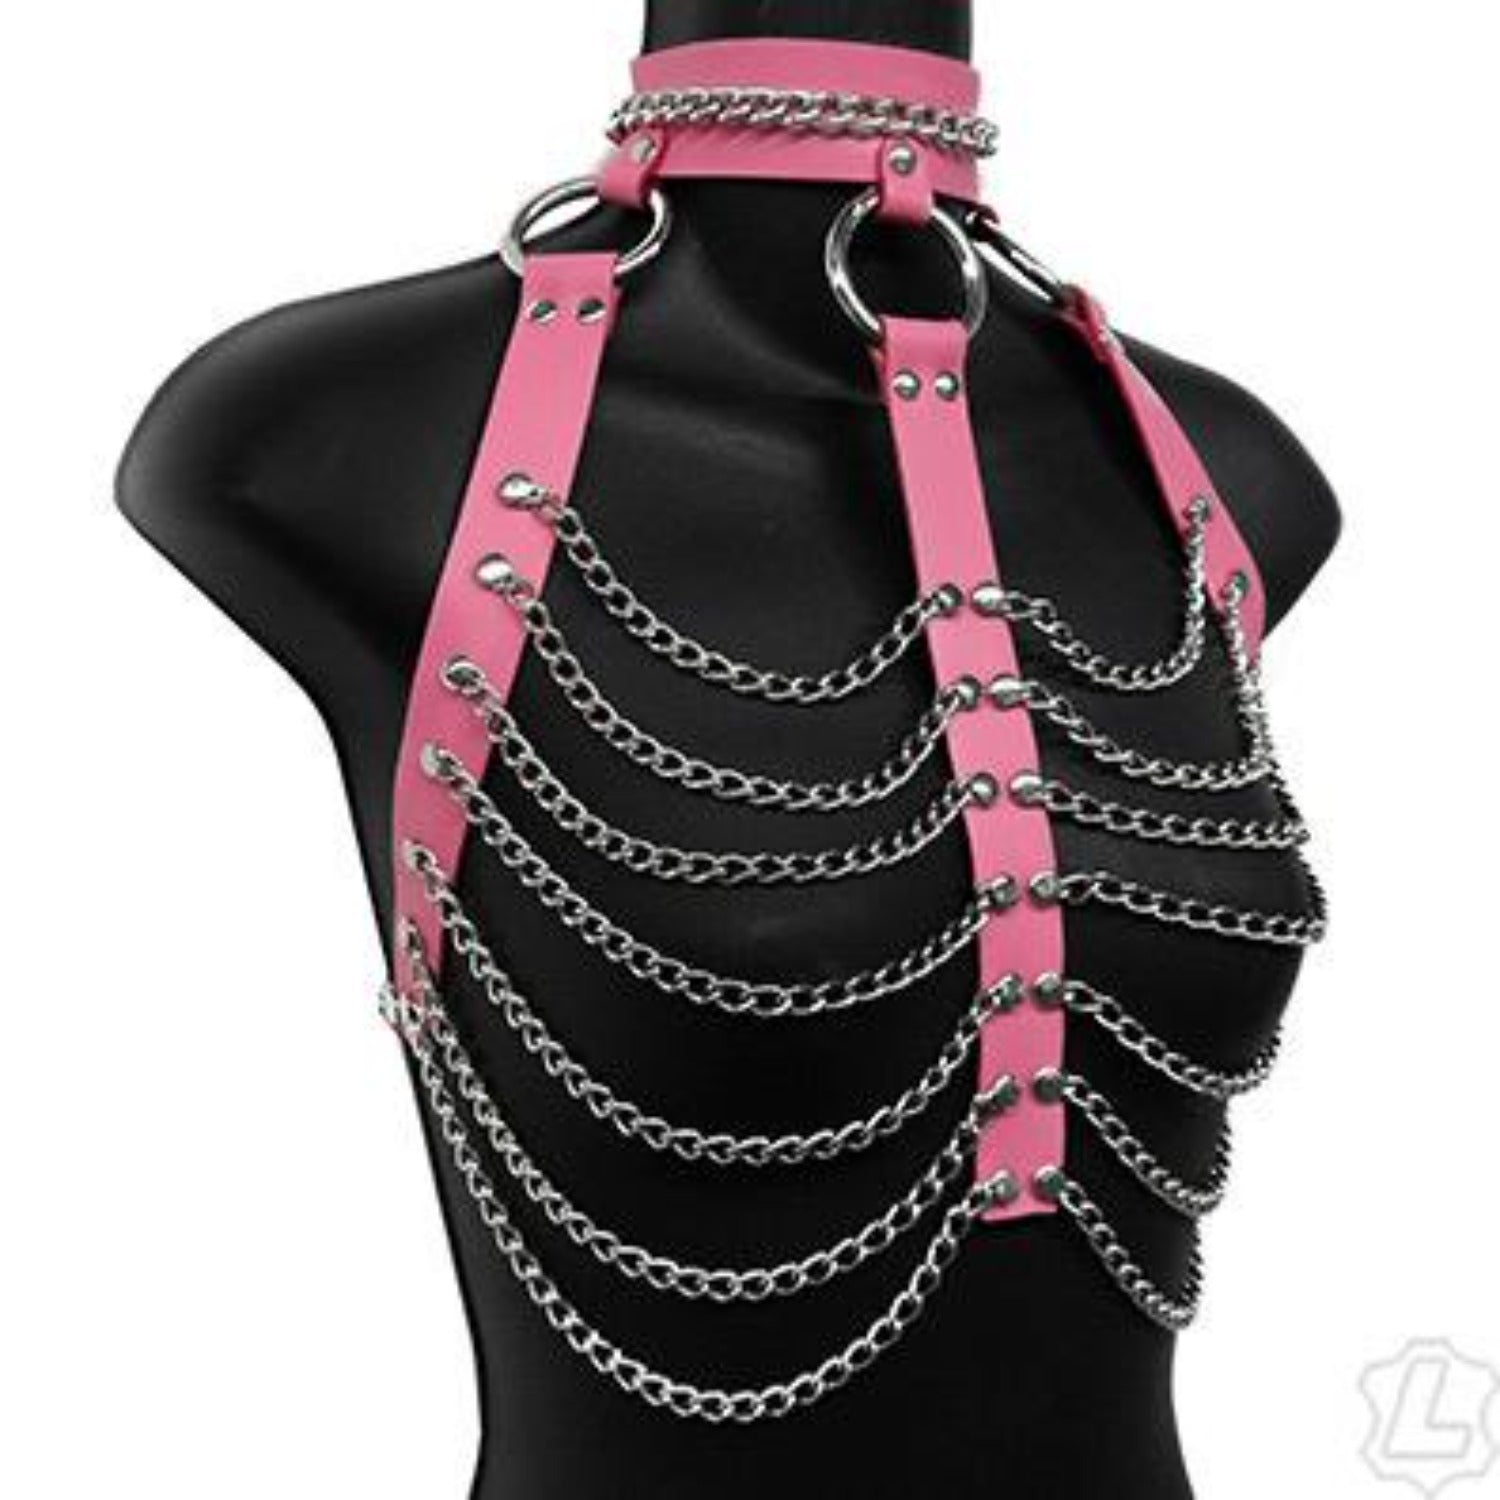 The pink leather and chain three column halter harness on a mannequin.